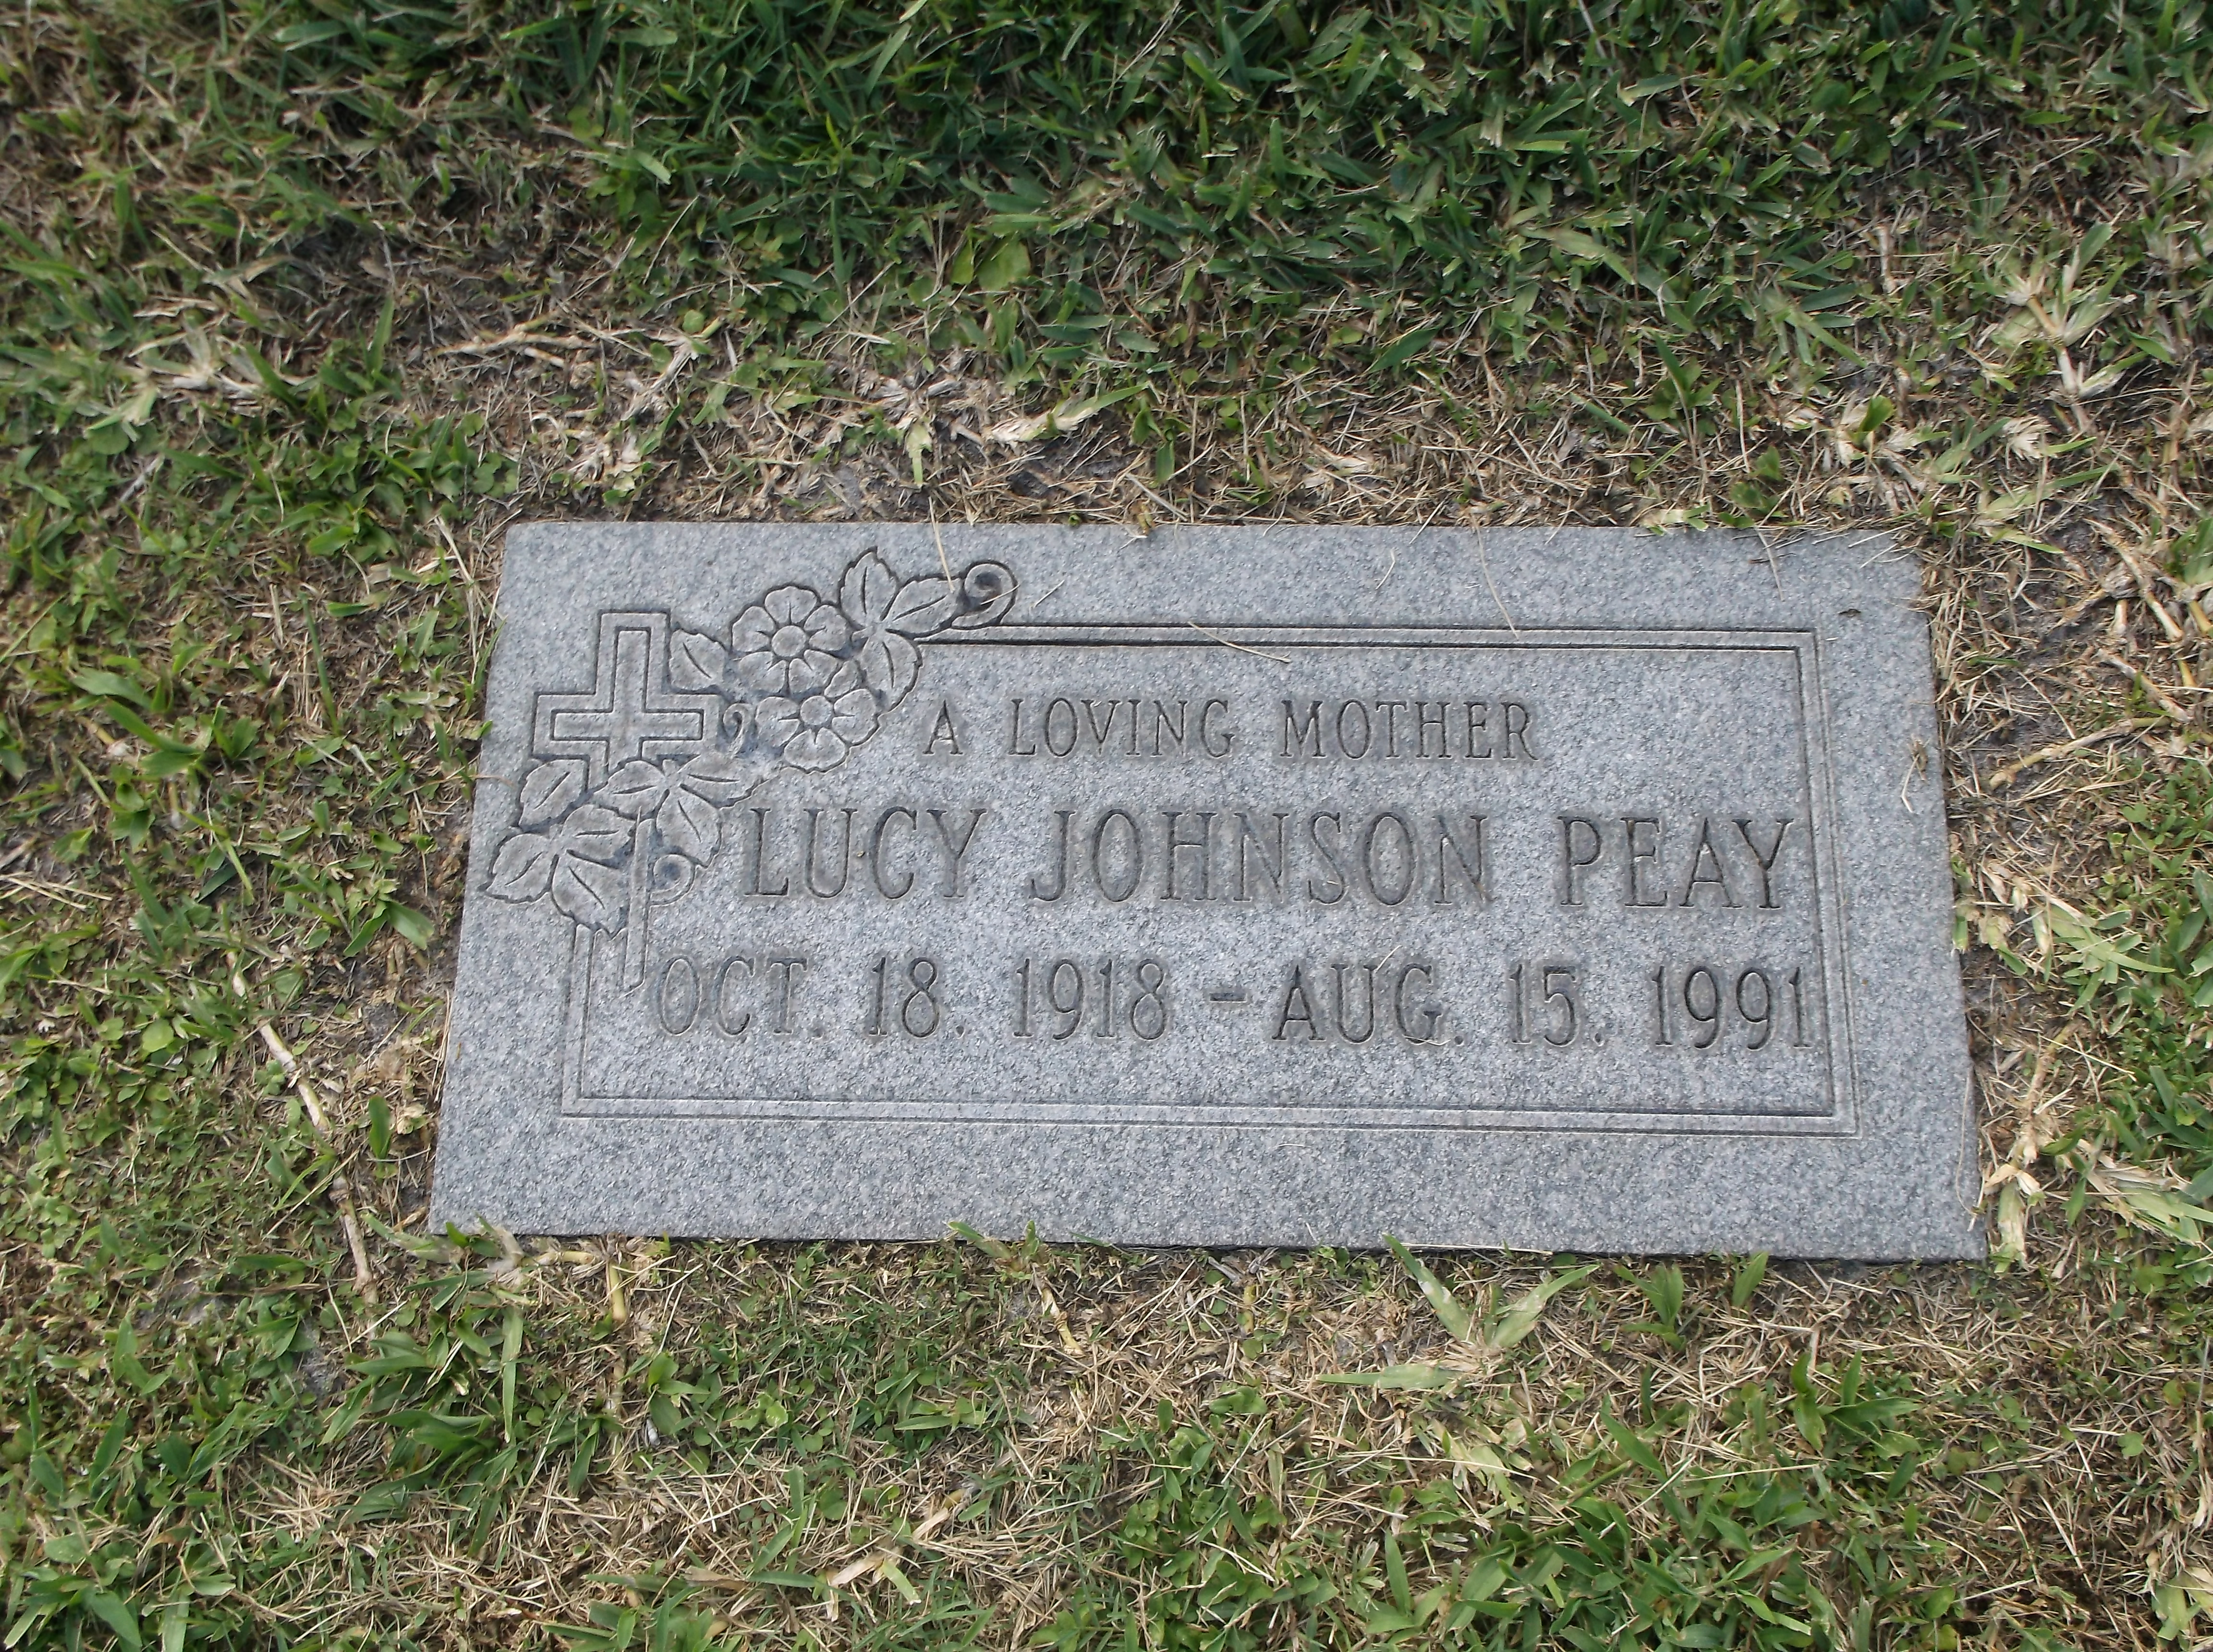 Lucy Johnson Peay